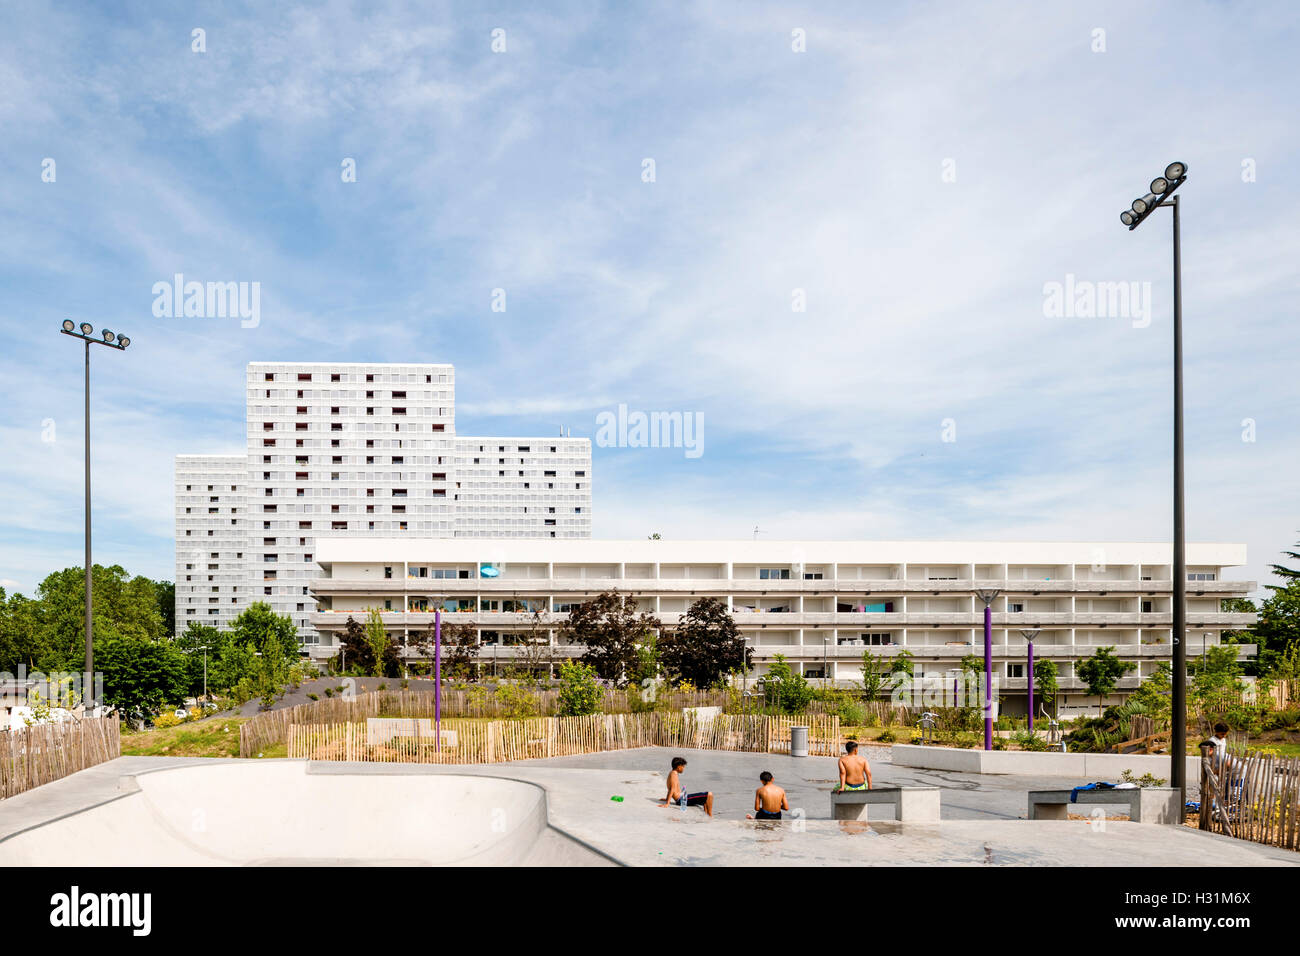 Long distance view from nearby skateboard park showing housing context. Urban Renovation Genicart Lormont in Bordeaux, Bordeaux, France. Architect: LAN Architecture, 2015. Stock Photo